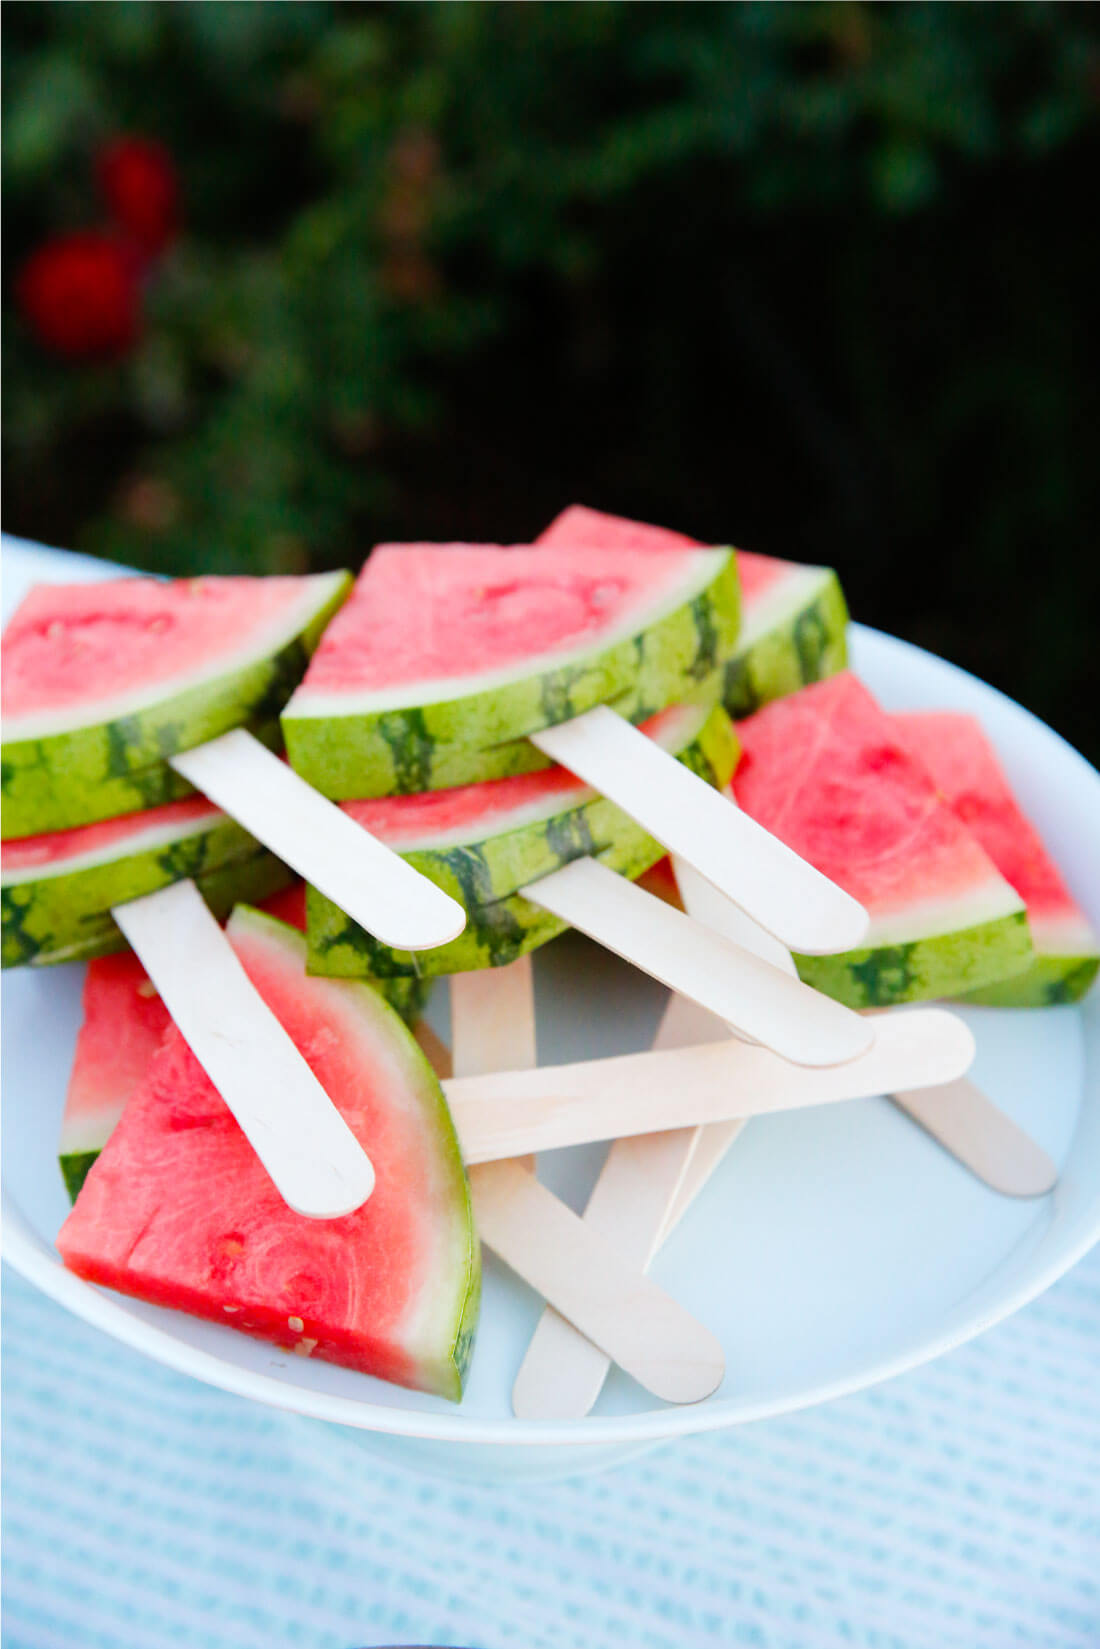 Watermelon on a stick for a summer party - so delicious! from www.thirtyhandmadedays.com